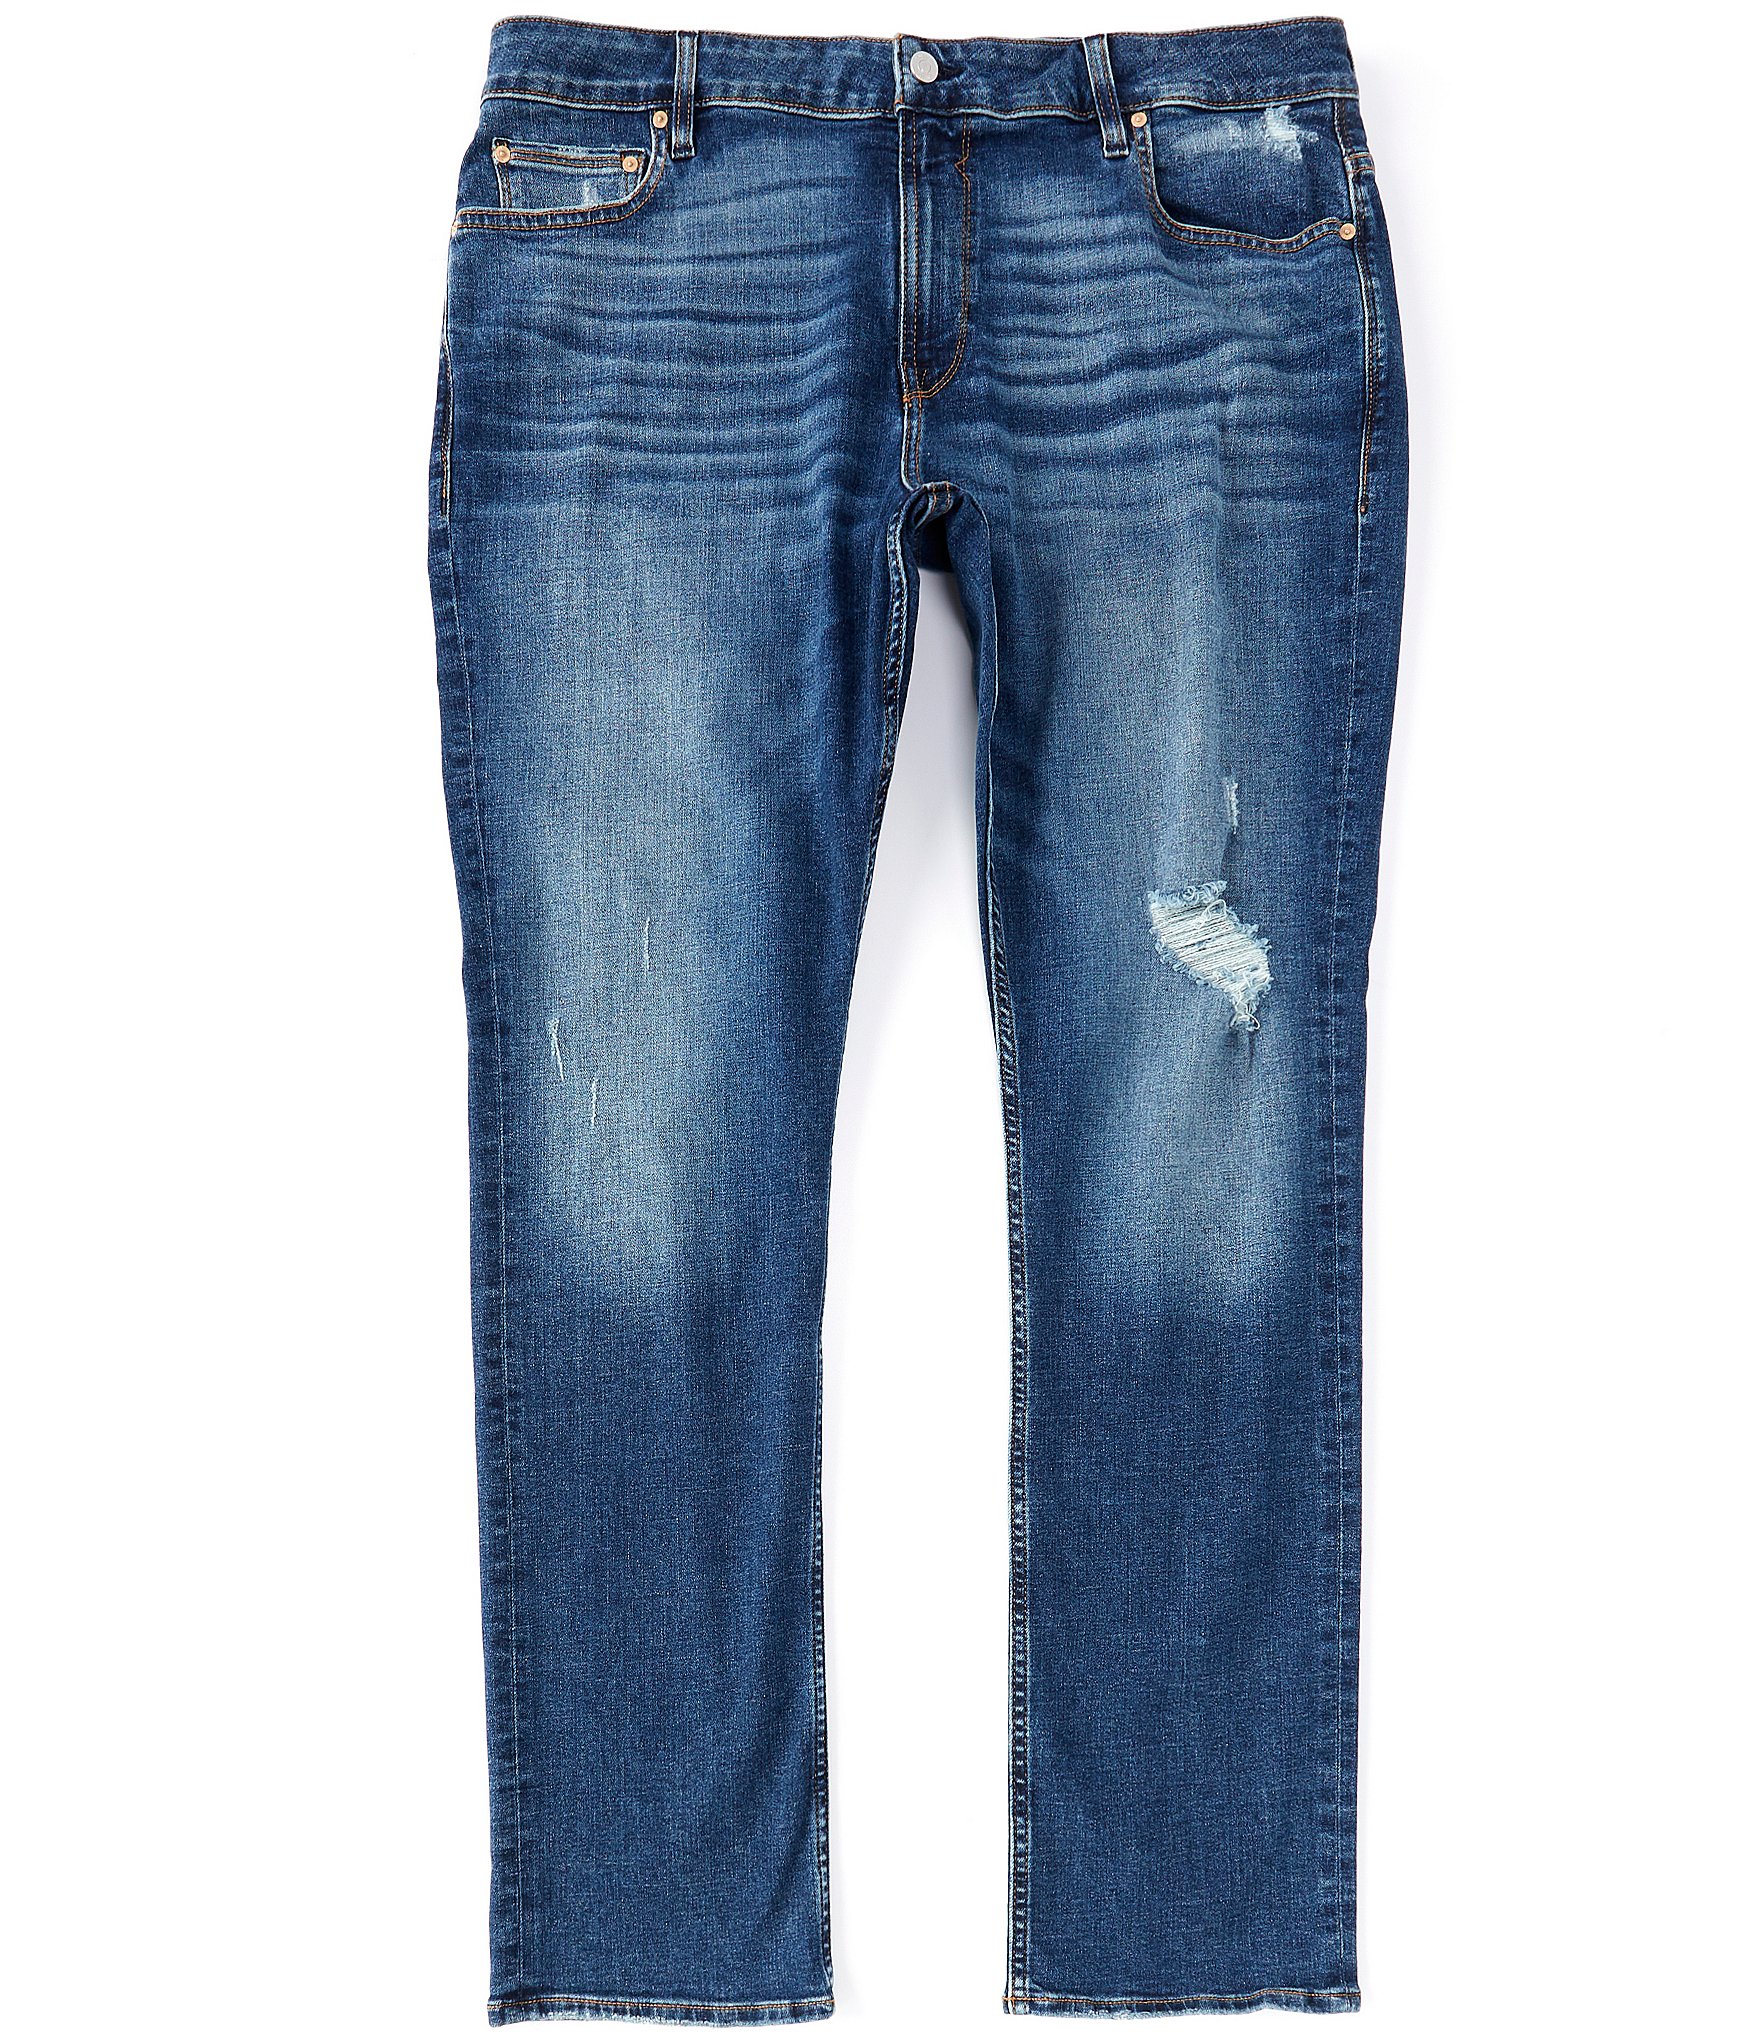 Guess Slim Fit Tapered Destructed Detail Jeans | Dillard's